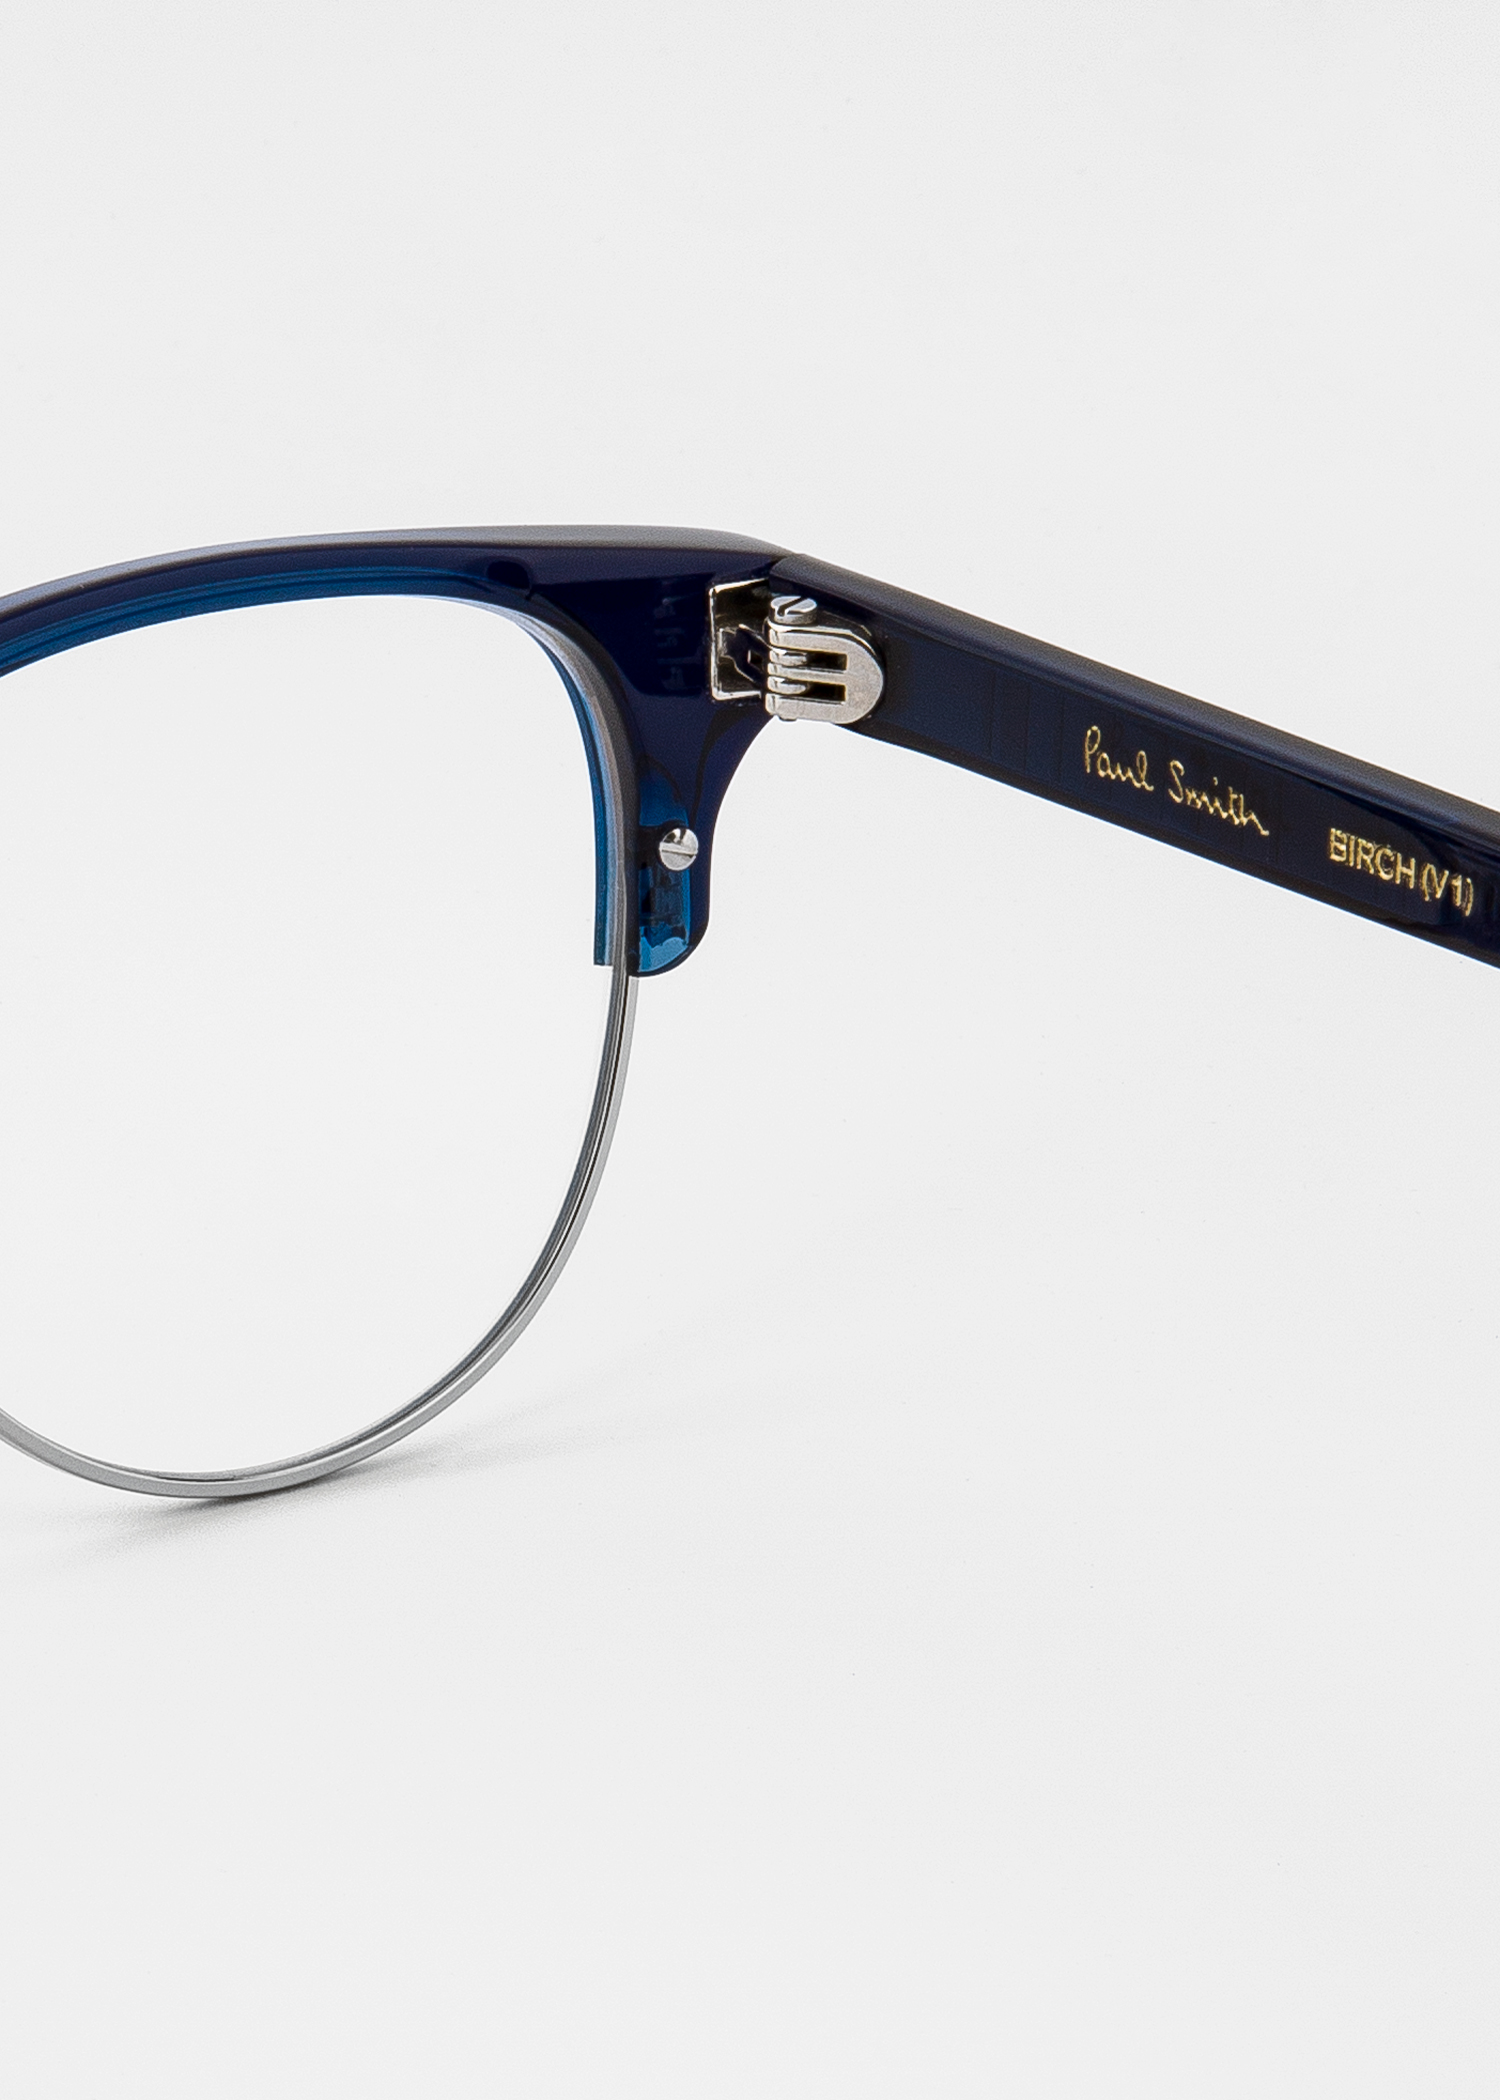 Detail view - Paul Smith Deep Navy 'Birch' Spectacles